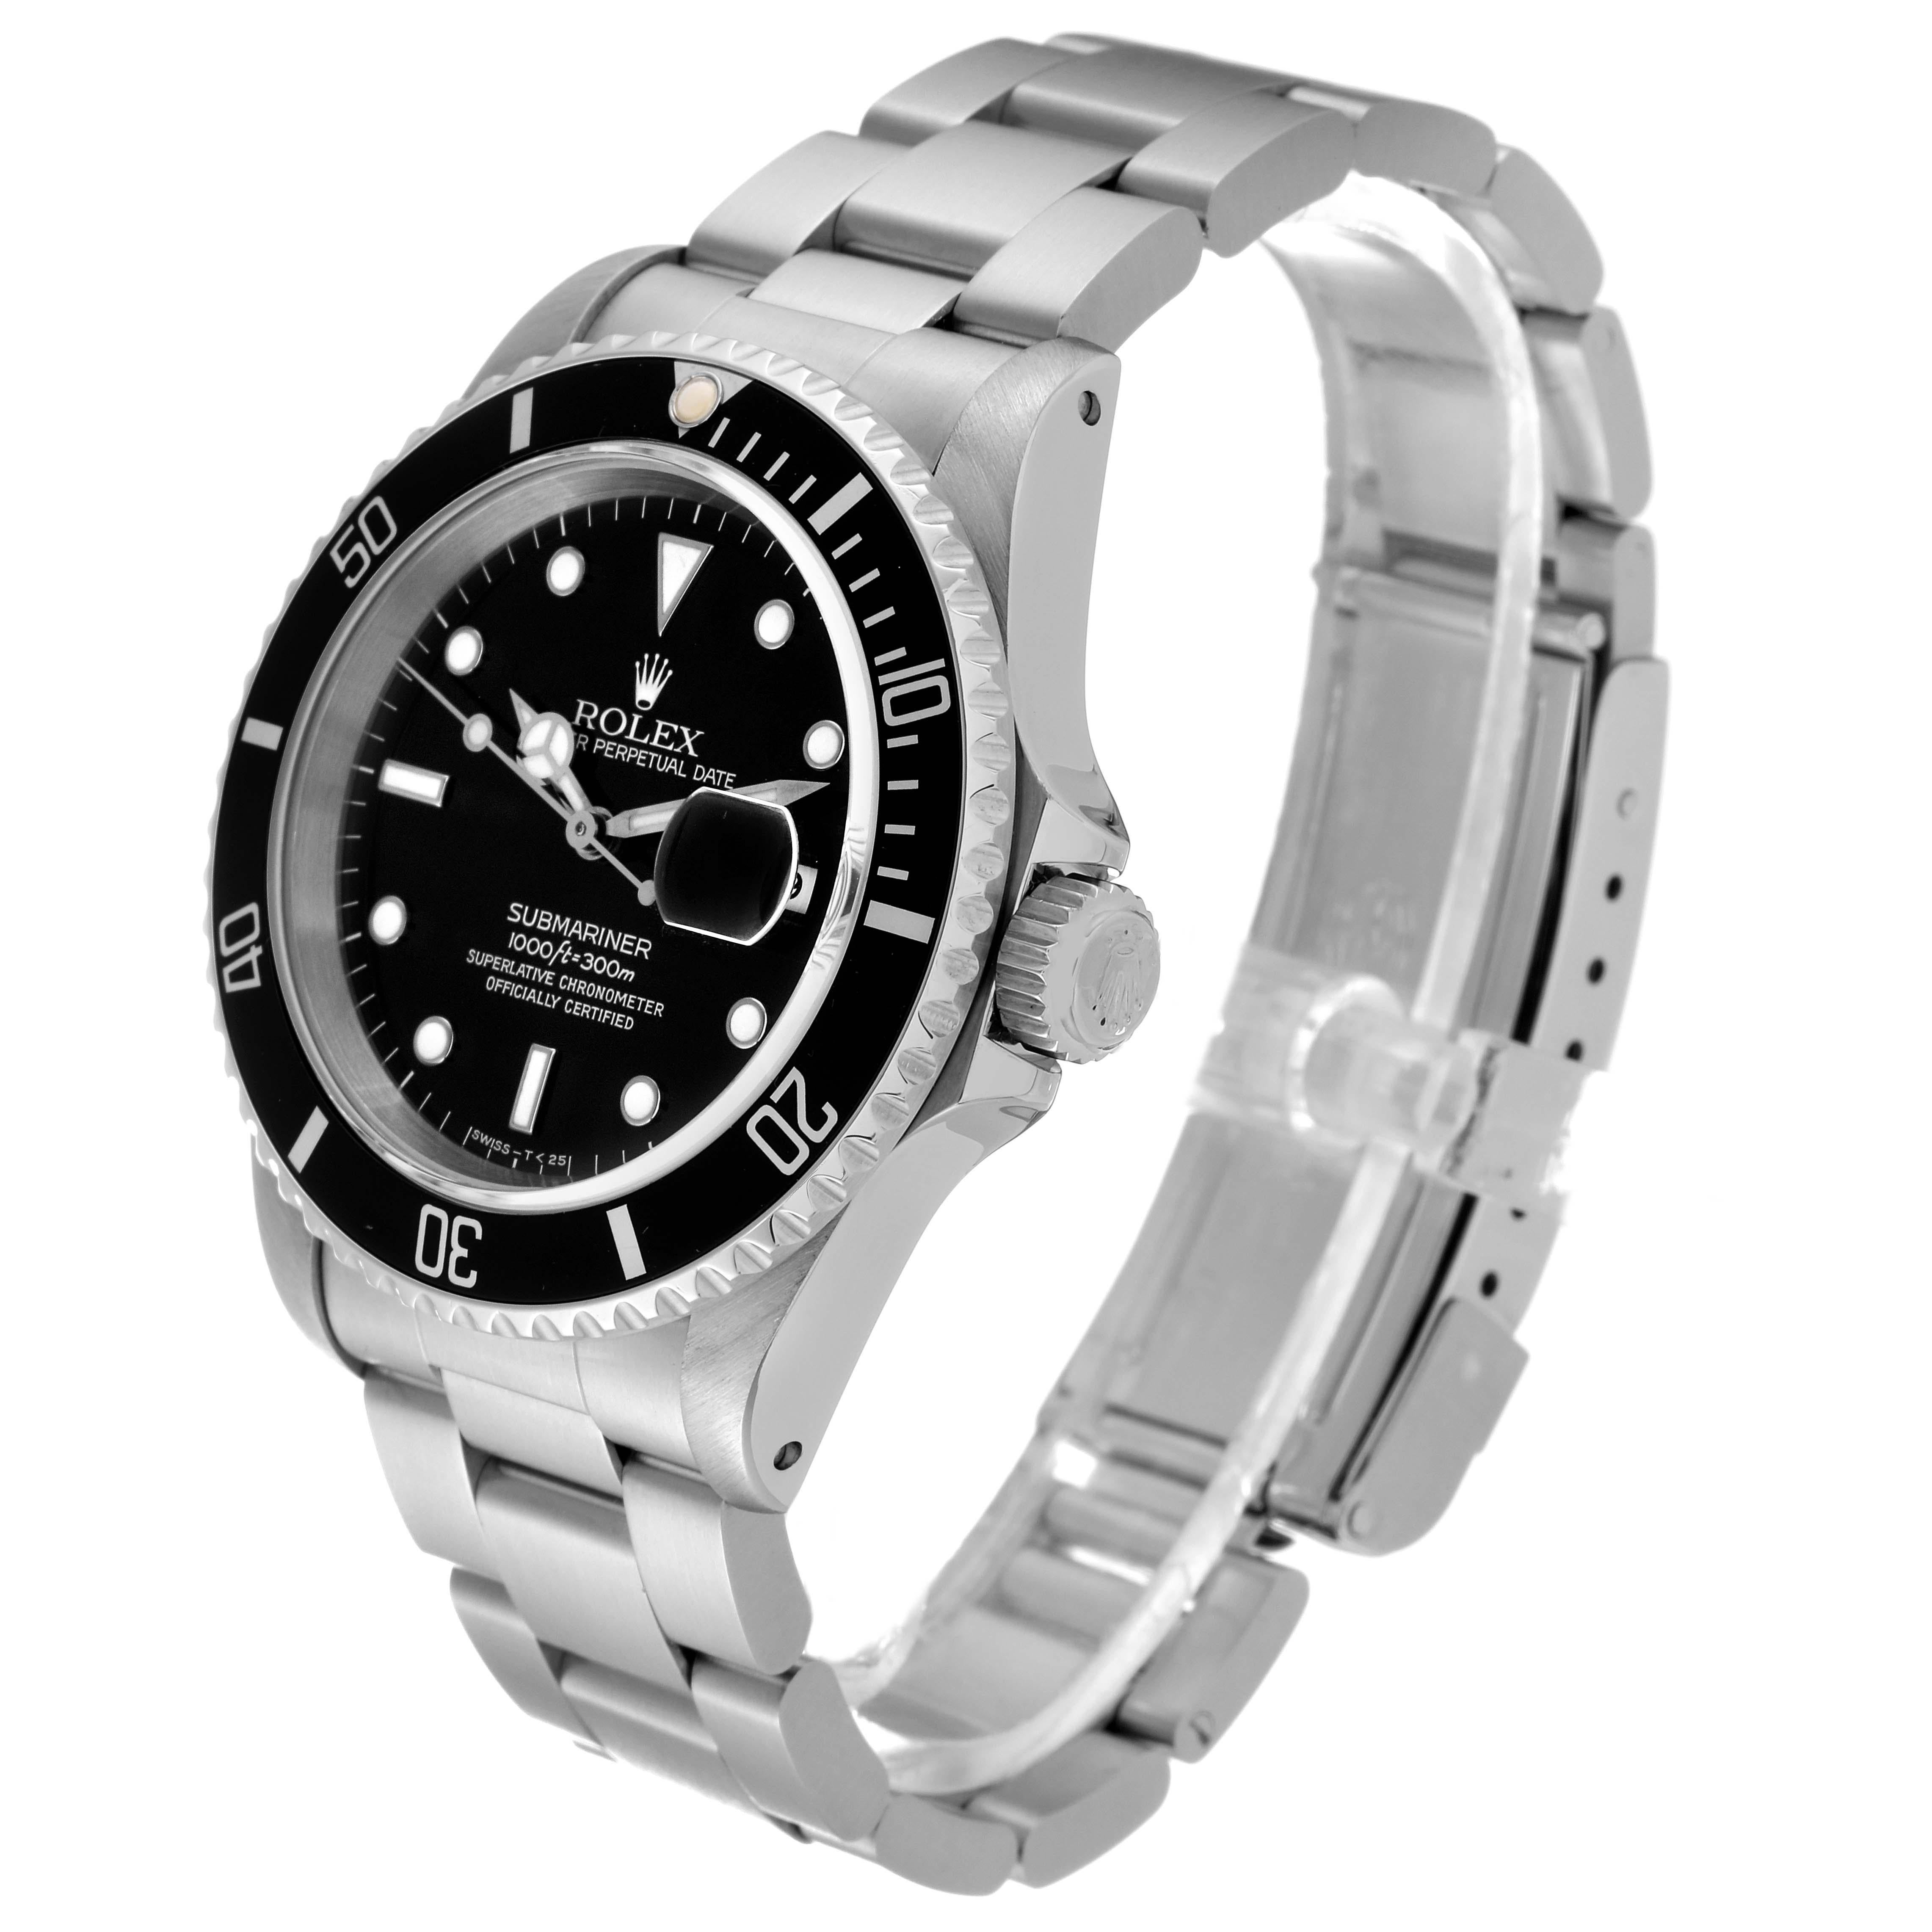 Rolex Submariner Date Black Frosted Dial Steel Mens Watch 16610 Box Papers en vente 2